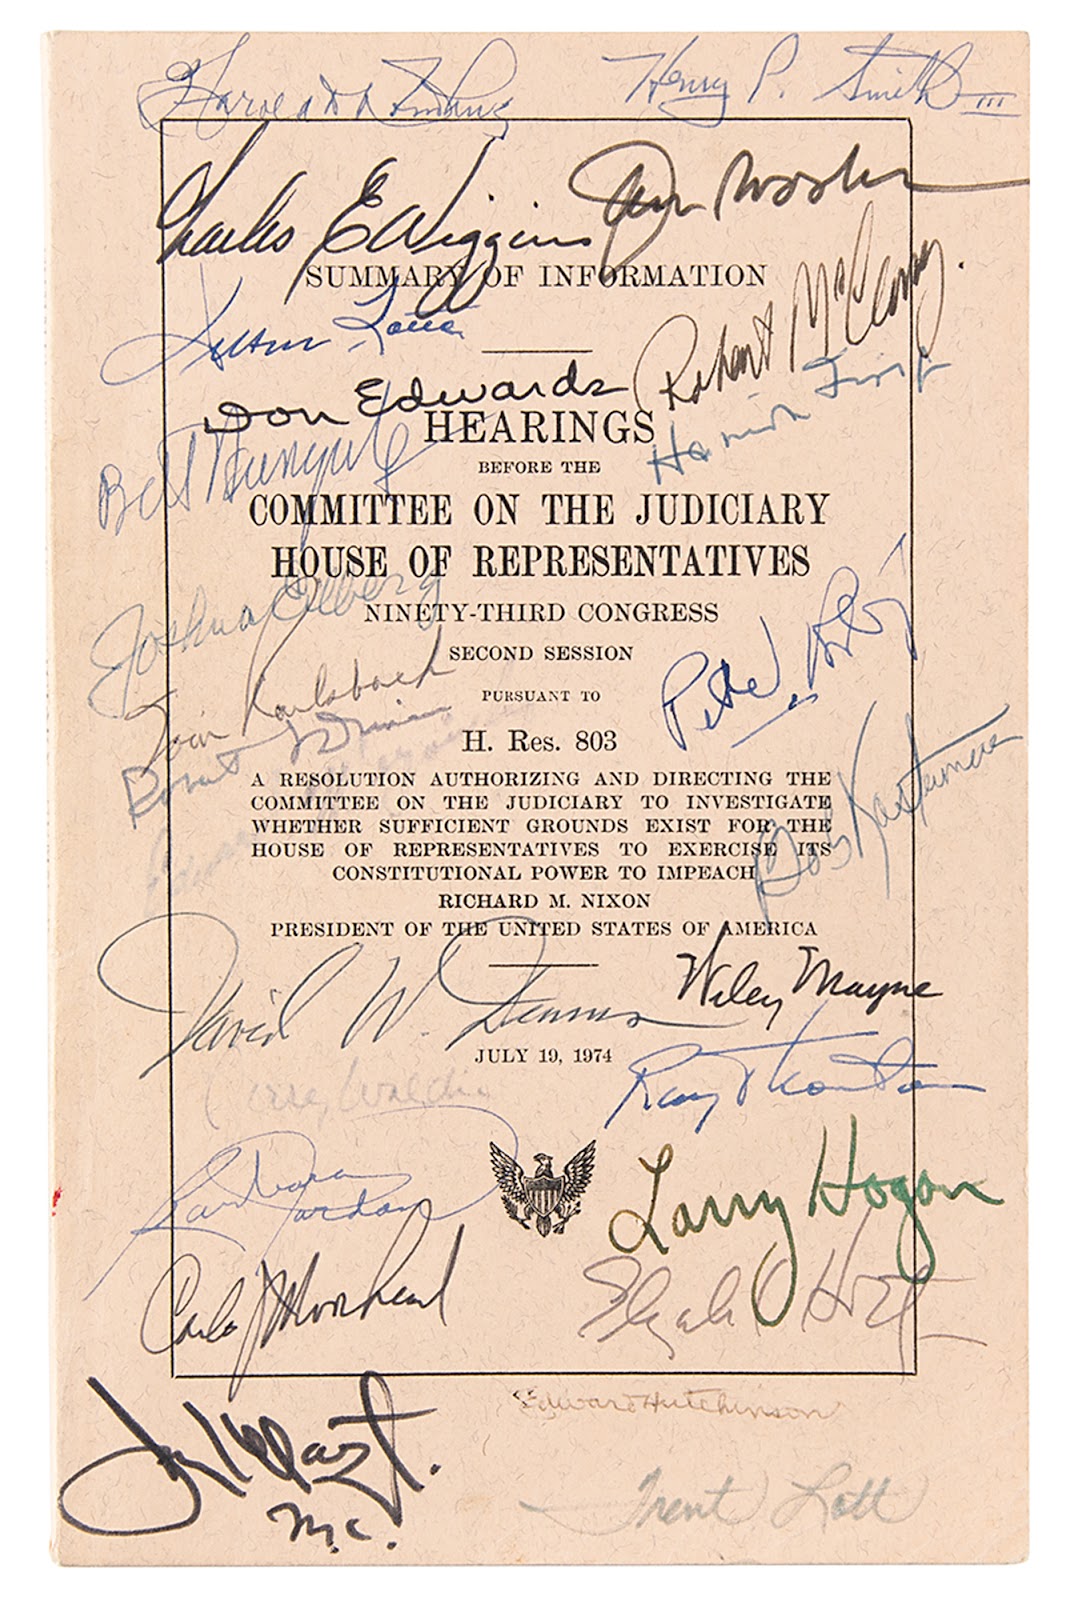 Autographed copy of “Hearings Before the Committee on the Judiciary, House of Representatives, Ninety-Third Congress, Second Session, Pursuant to H. Res. 803.”